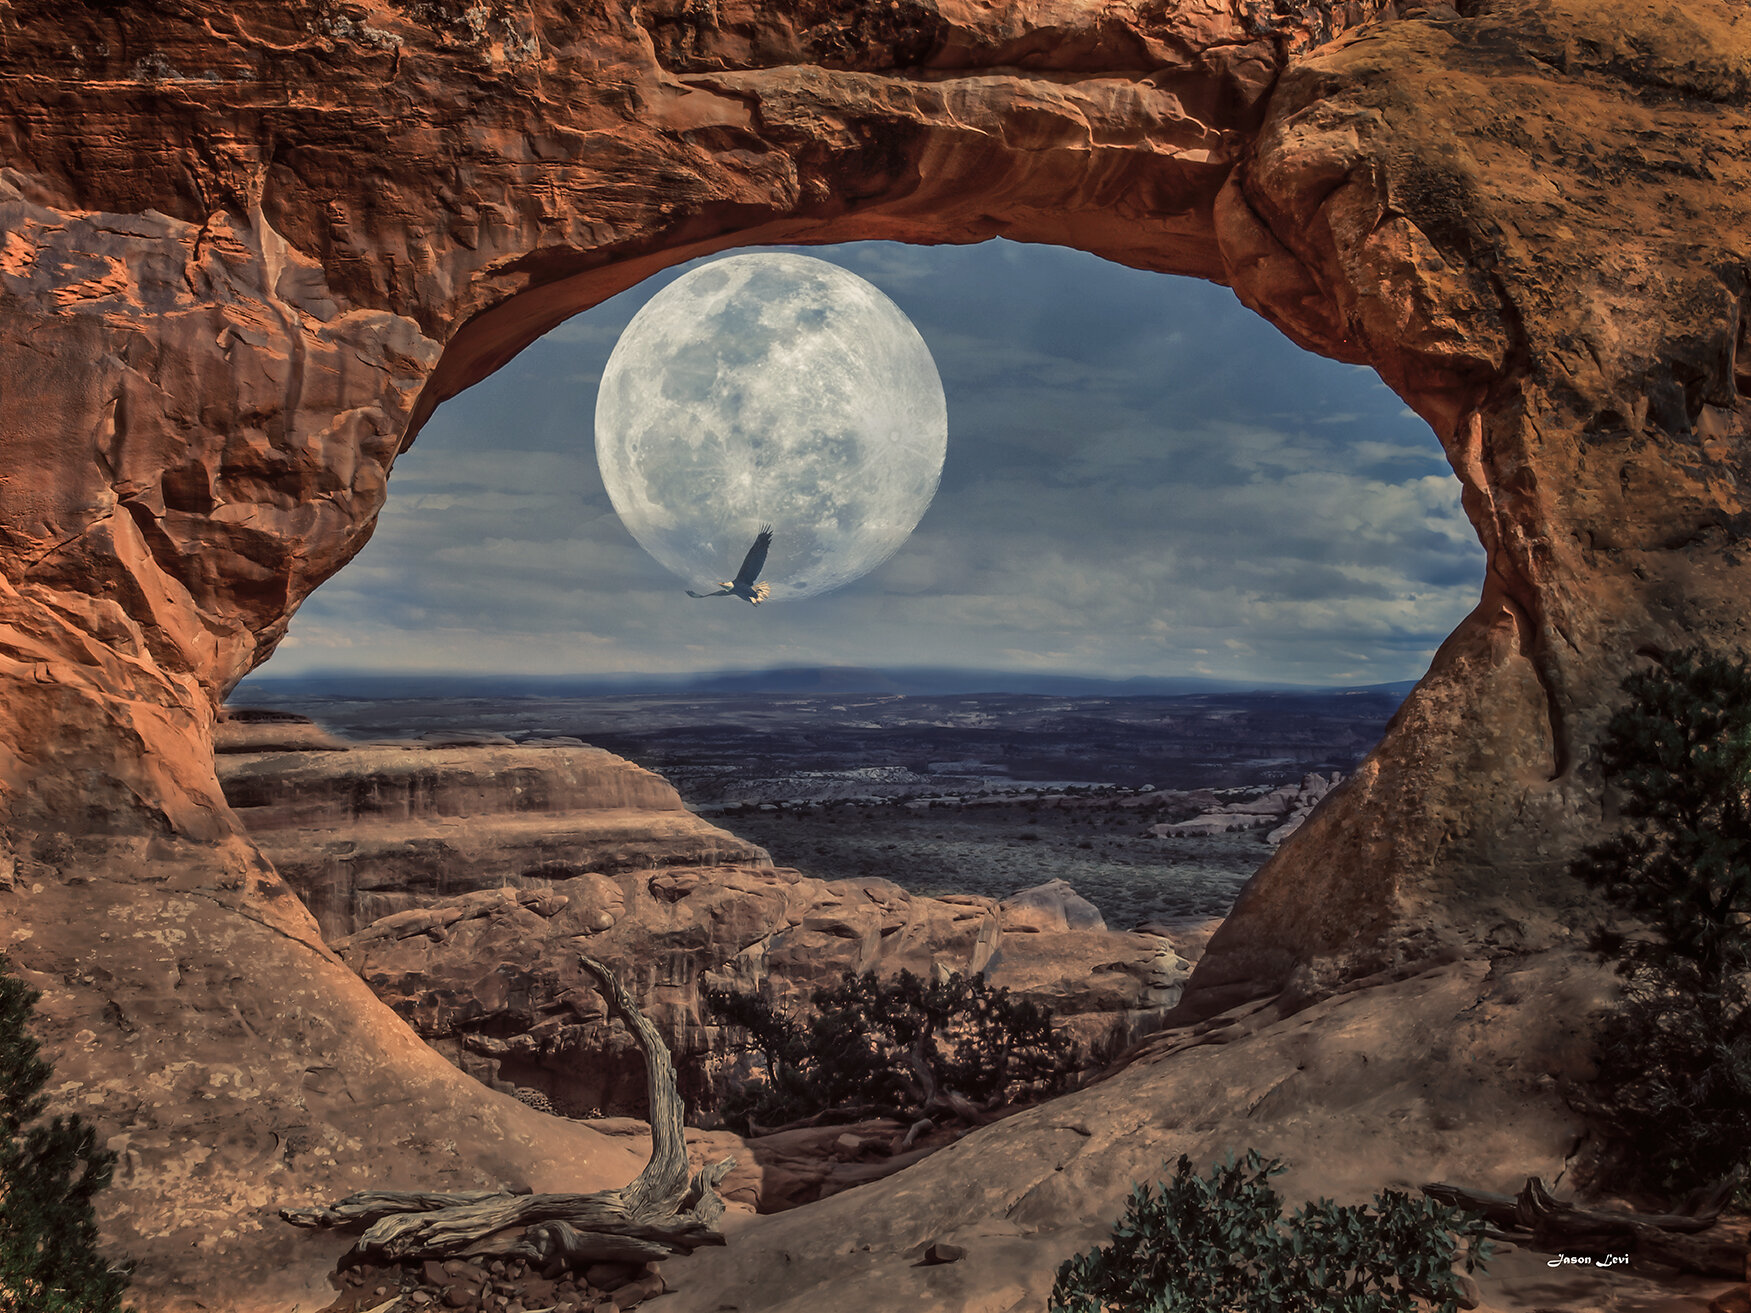 THE ARCH AND THE MOON